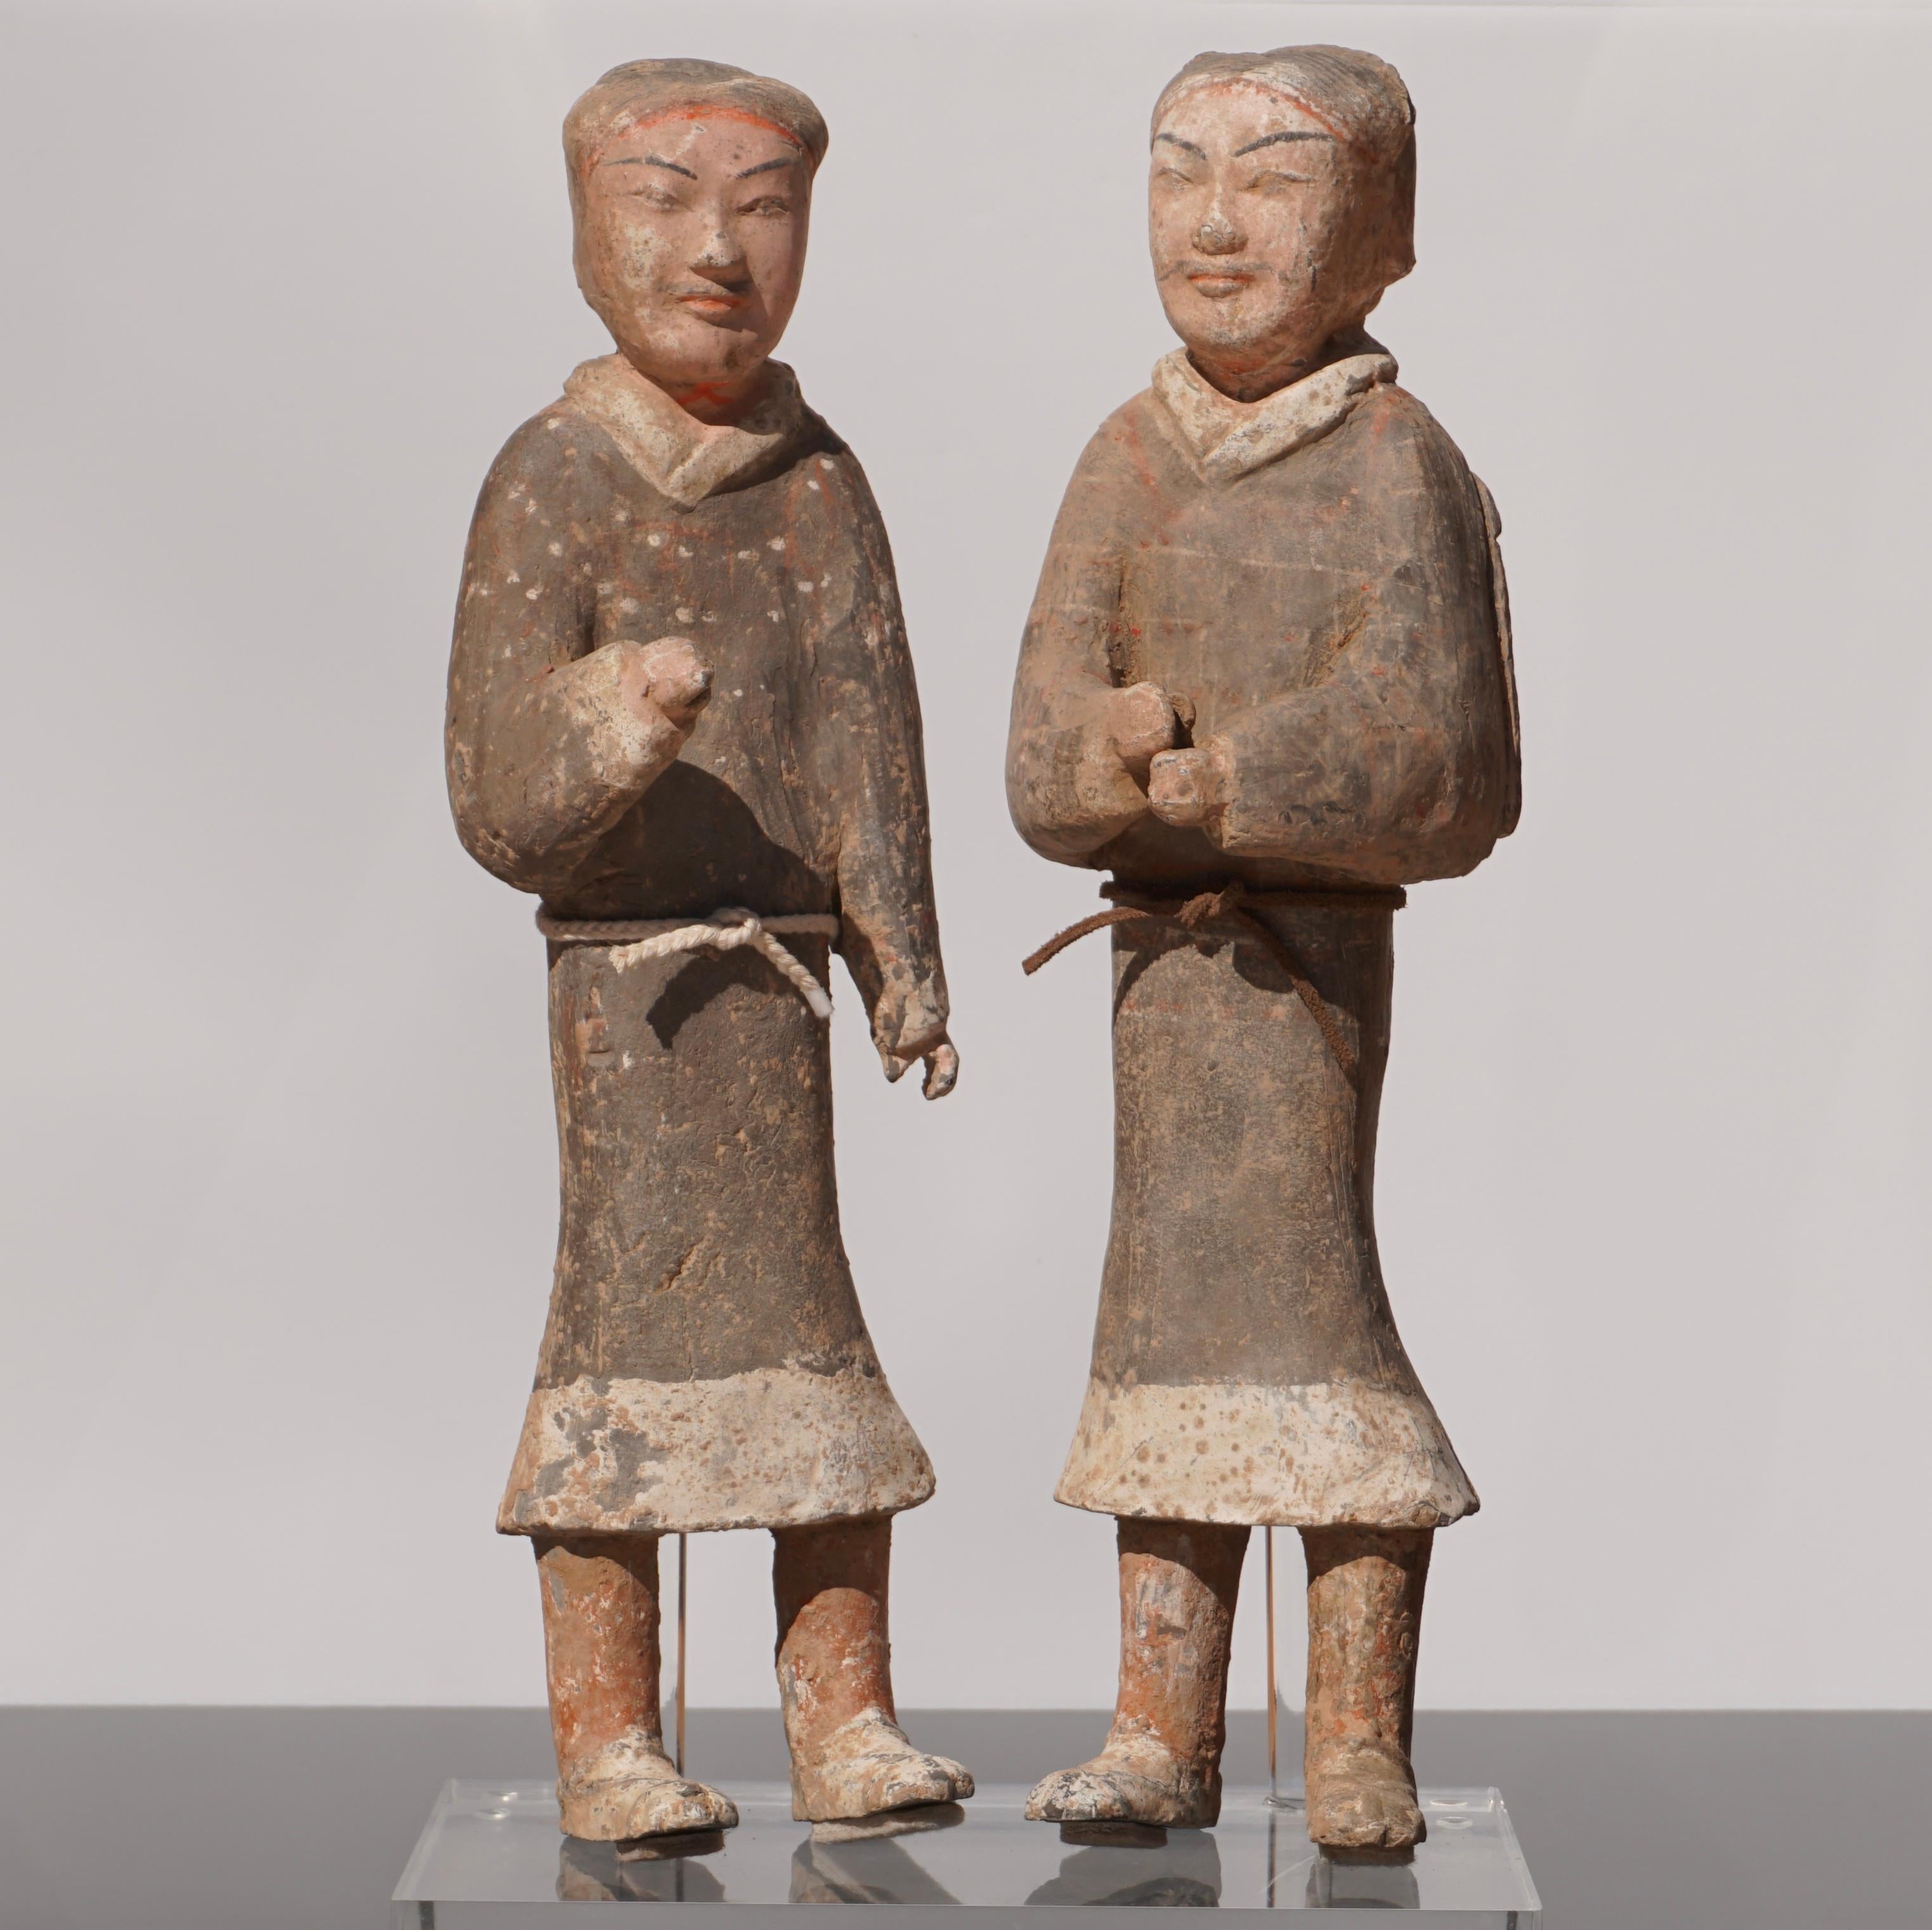 A large pair of Han dynasty terracotta guardsmen 
Pottery figures with original ornate and decorative paint throughout. The long robes with intricate patterns and detailed facial features. 
China, early Western Han dynasty (3rd–2nd BC)